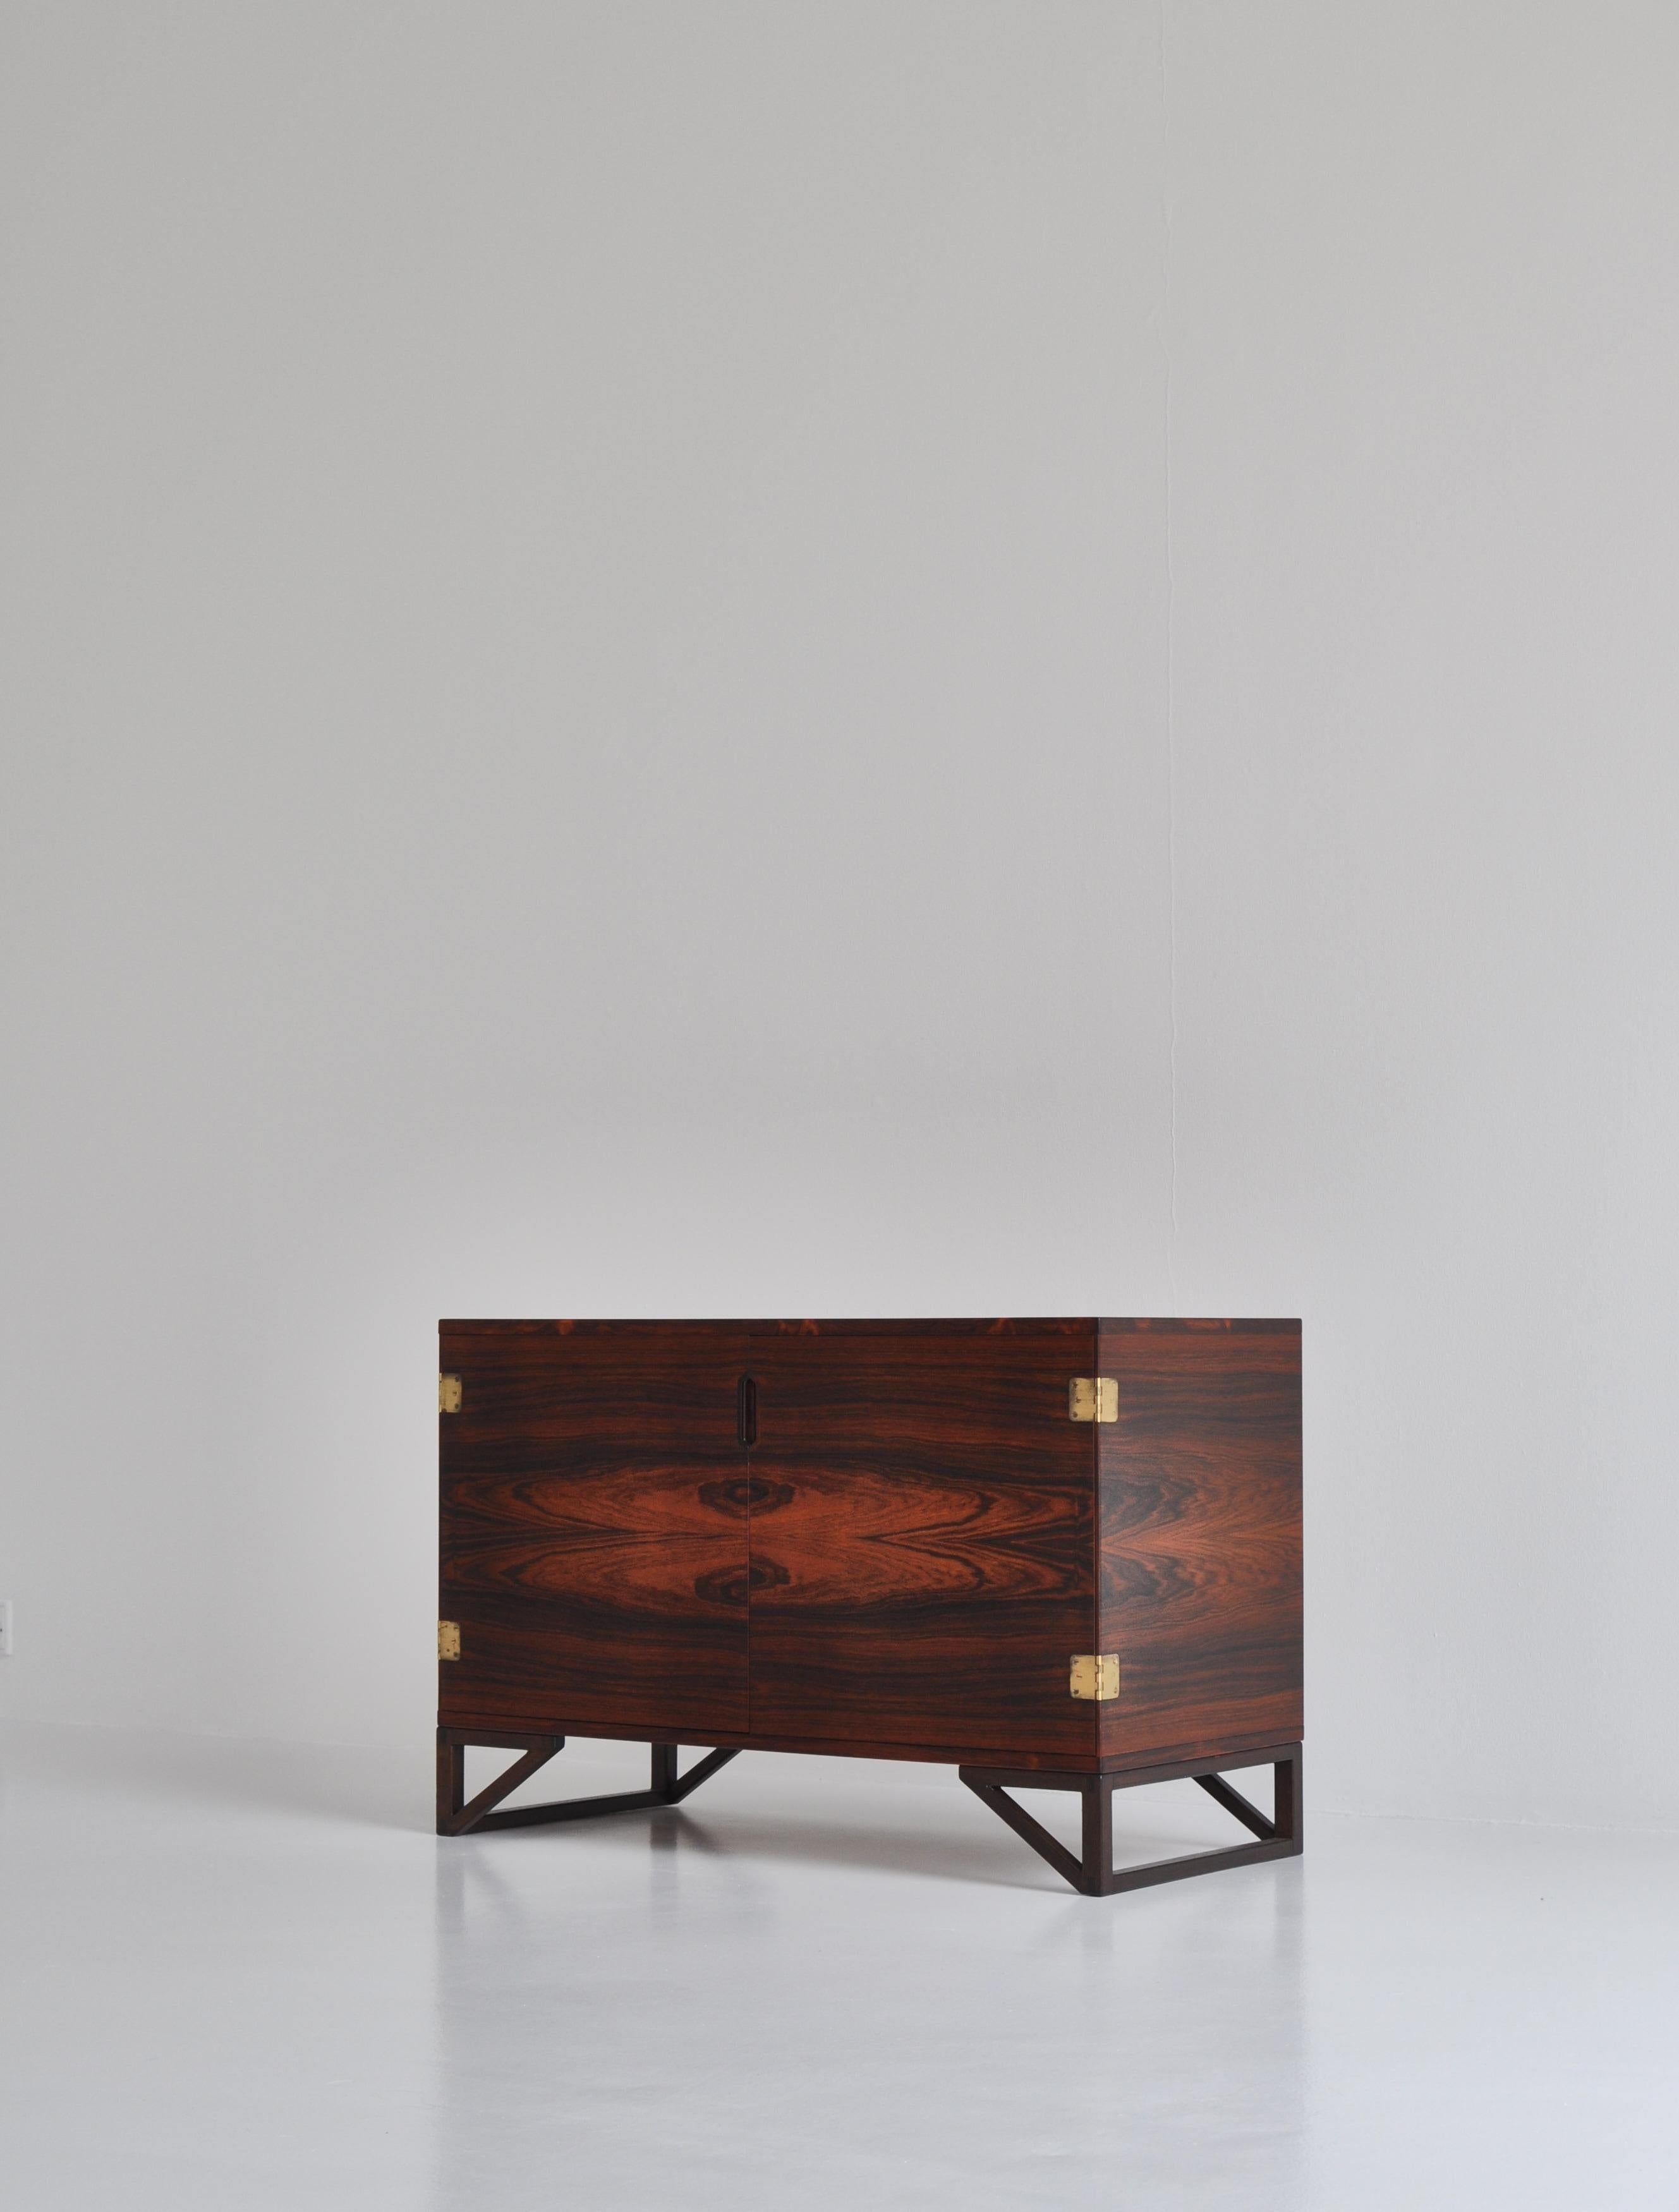 Elegant low sideboard in rosewood by Danish designer Svend Langkilde for Illums Bolighus in the 1960s. The elegant solid teakwood drawers features finger joints and can be pulled out and used as trays. The doors have beautiful hinges in patinated